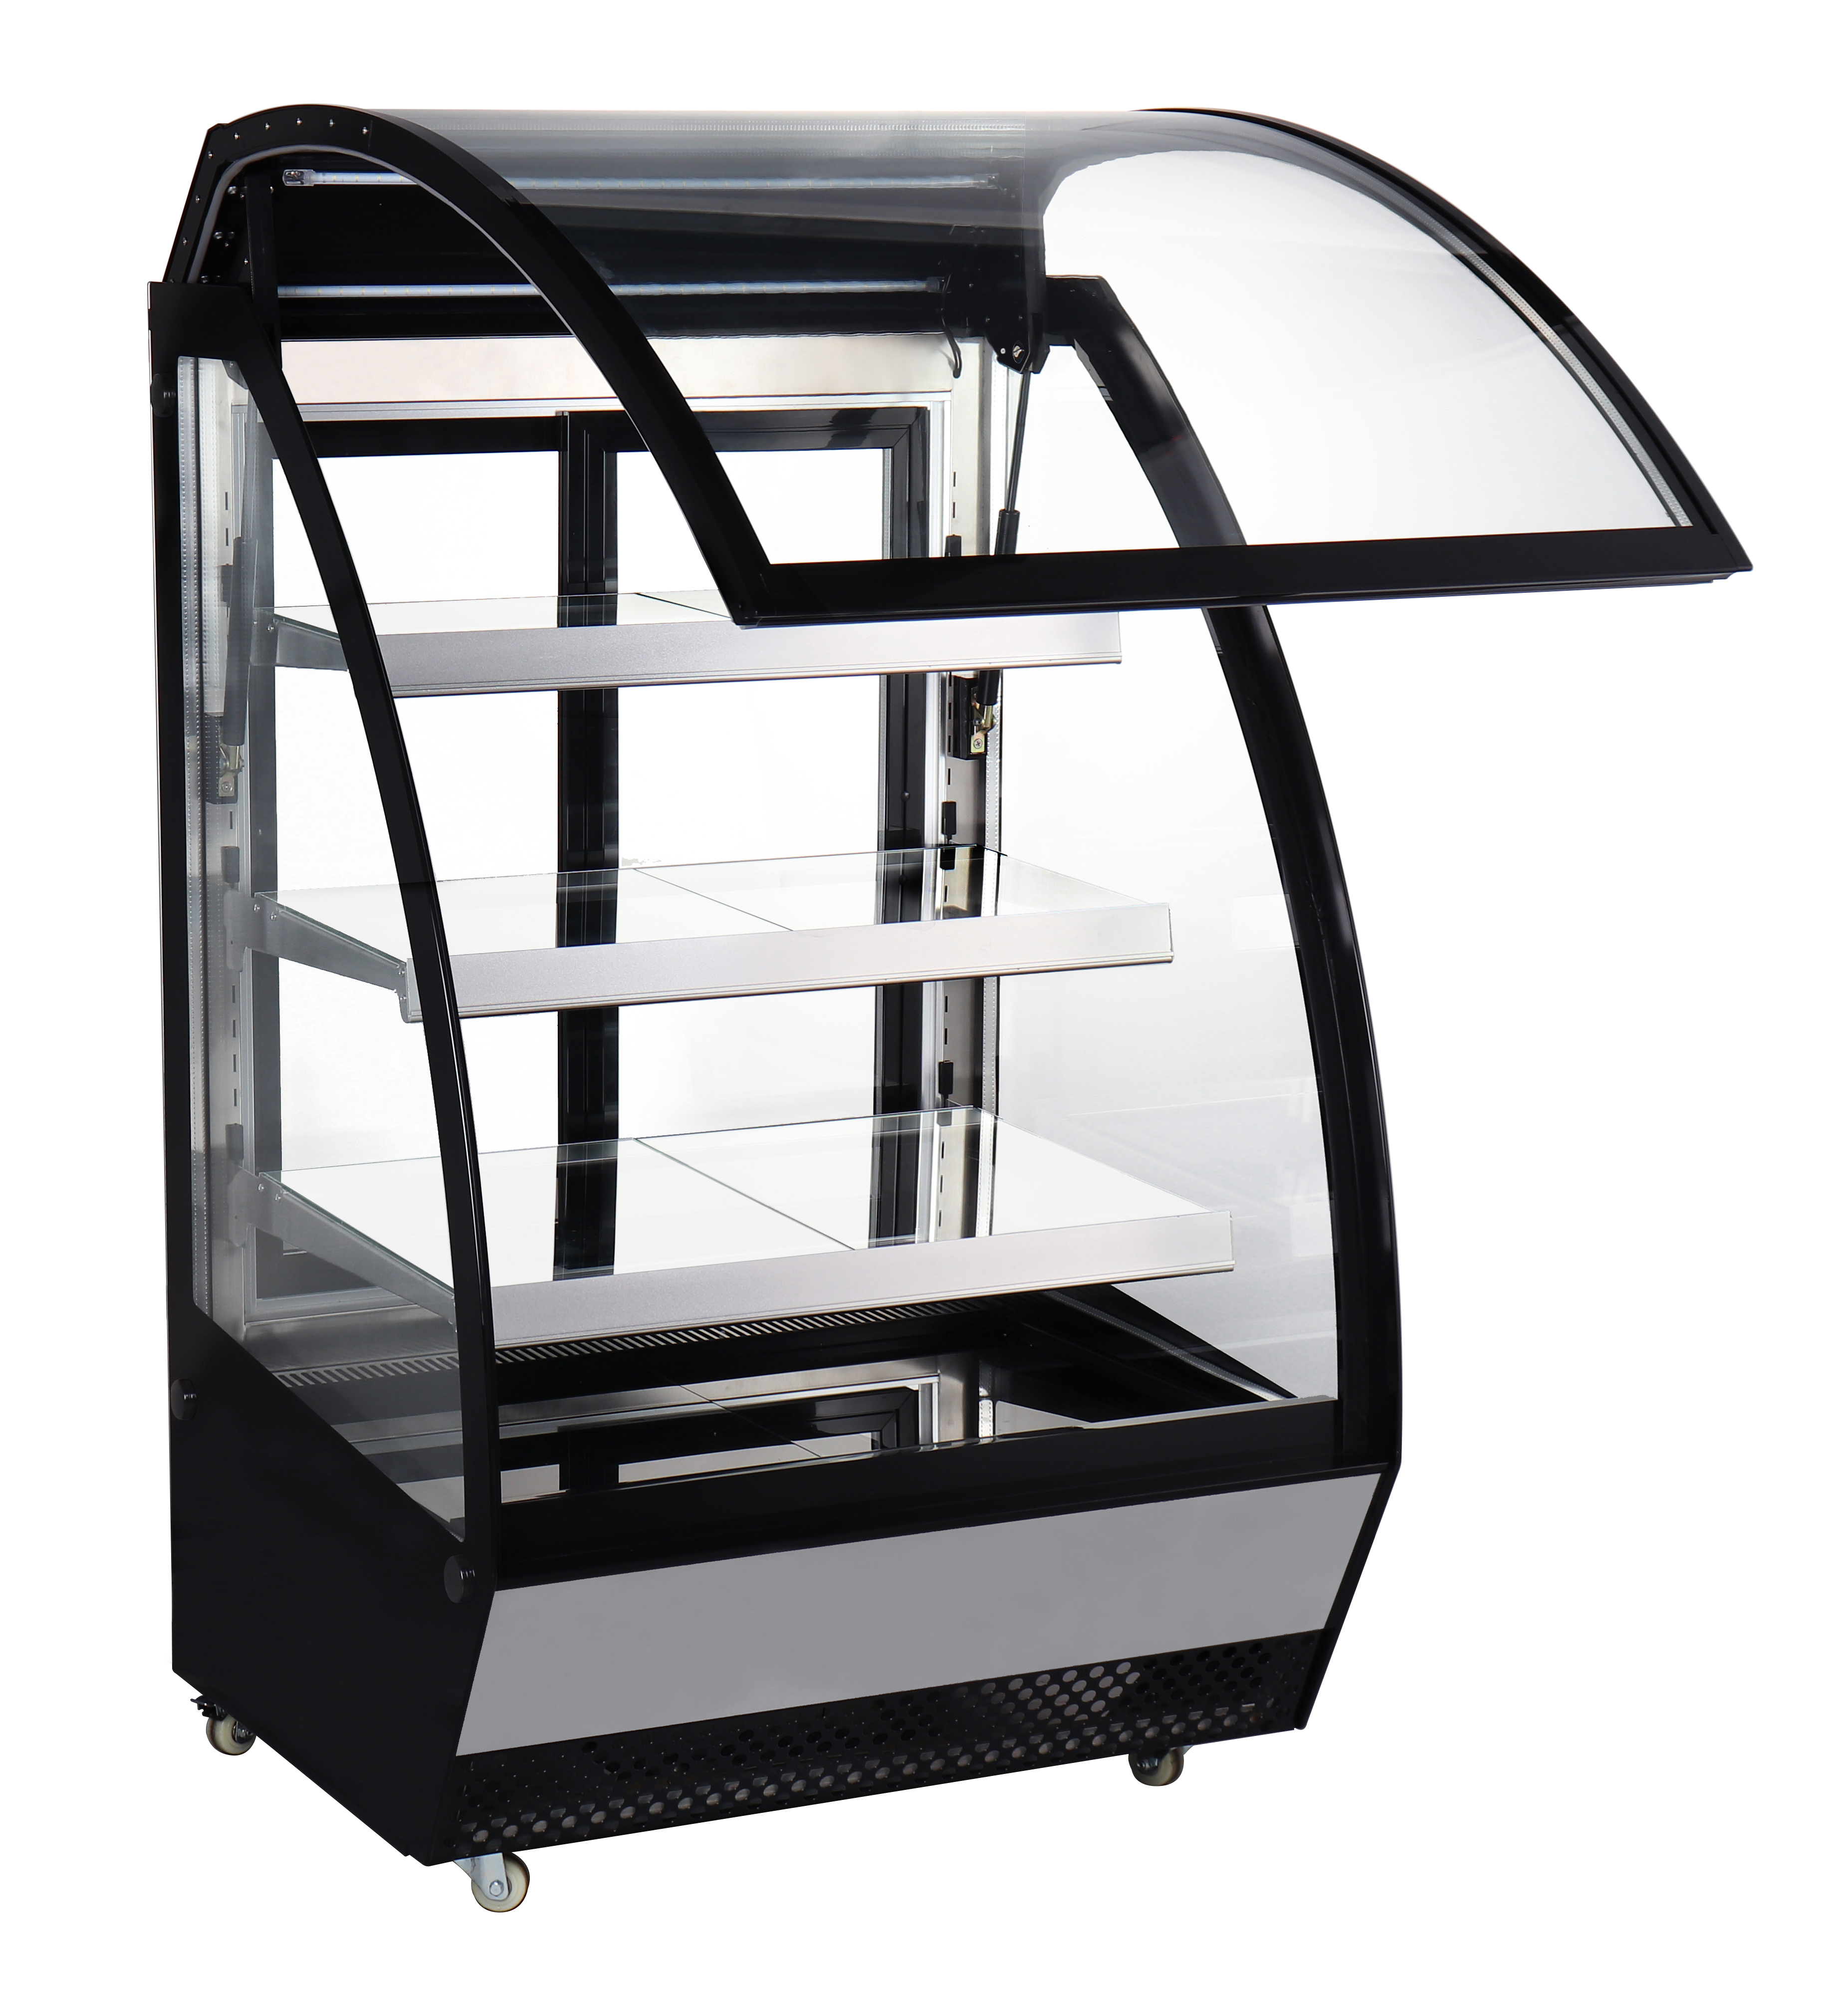 FOUR-SIDED GLASS COOLER